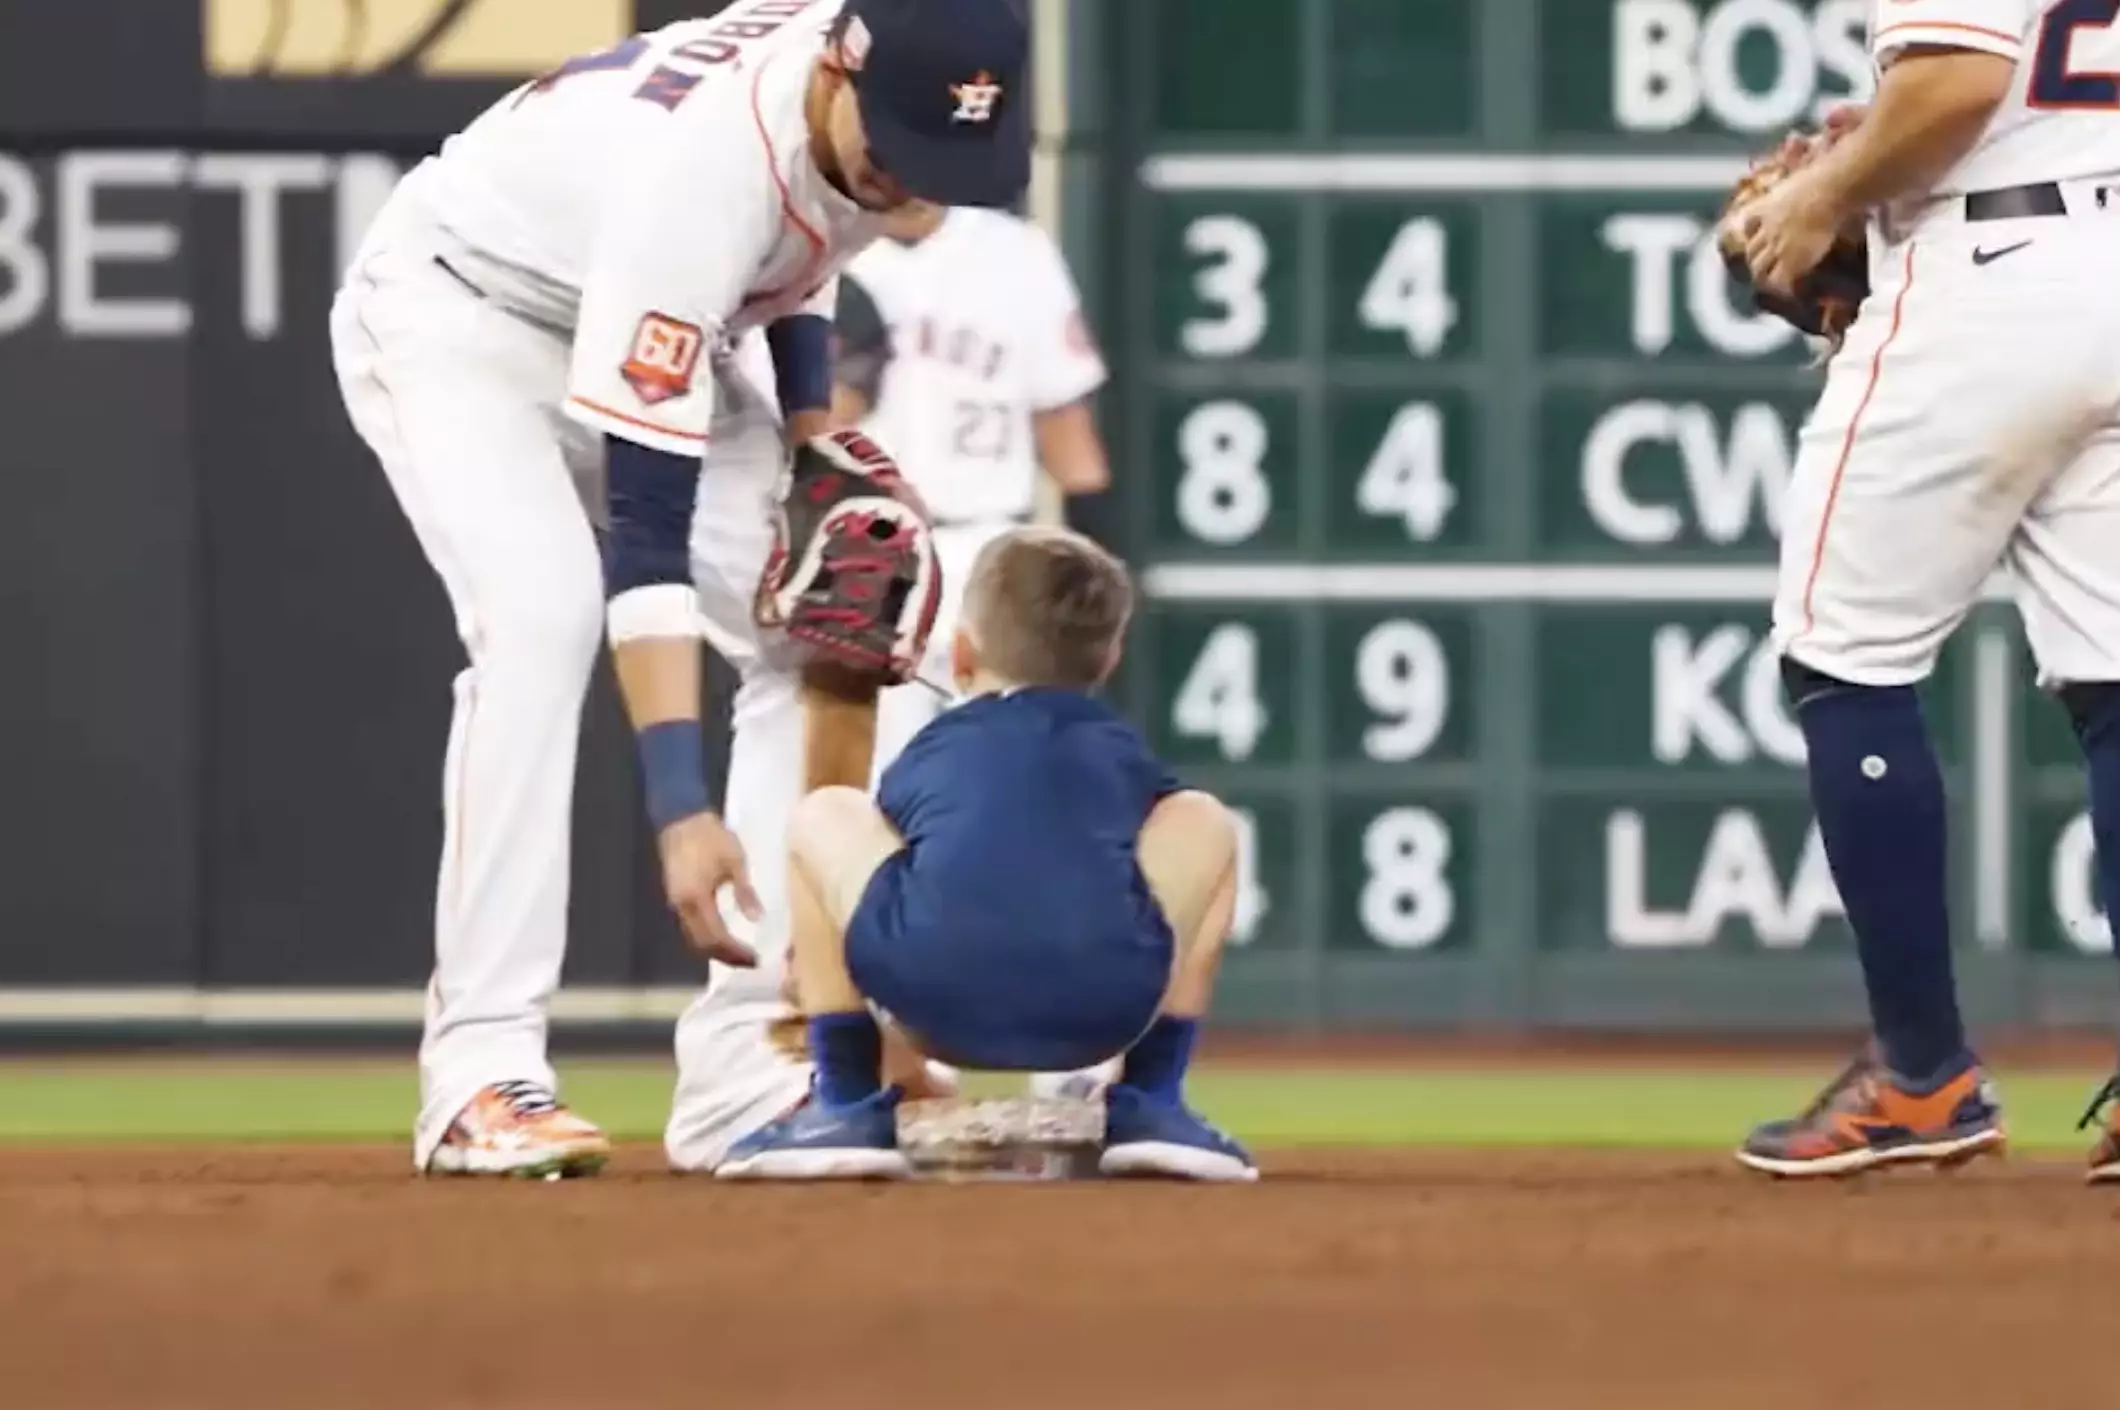 Houston Astros: The 6-year-old tried to steal second base